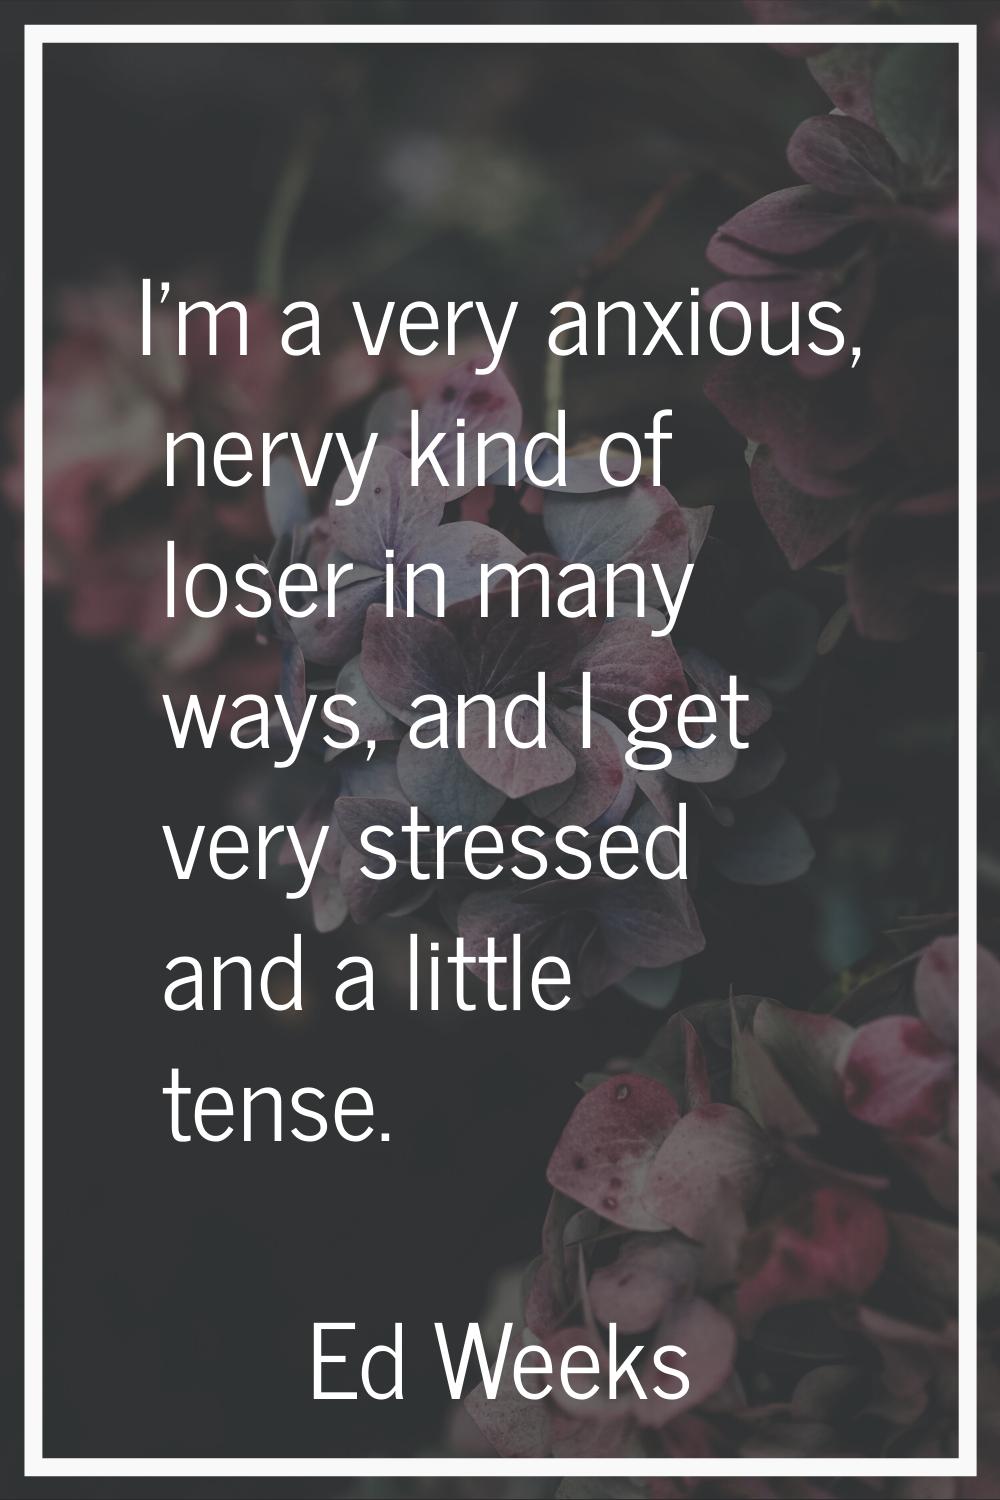 I'm a very anxious, nervy kind of loser in many ways, and I get very stressed and a little tense.